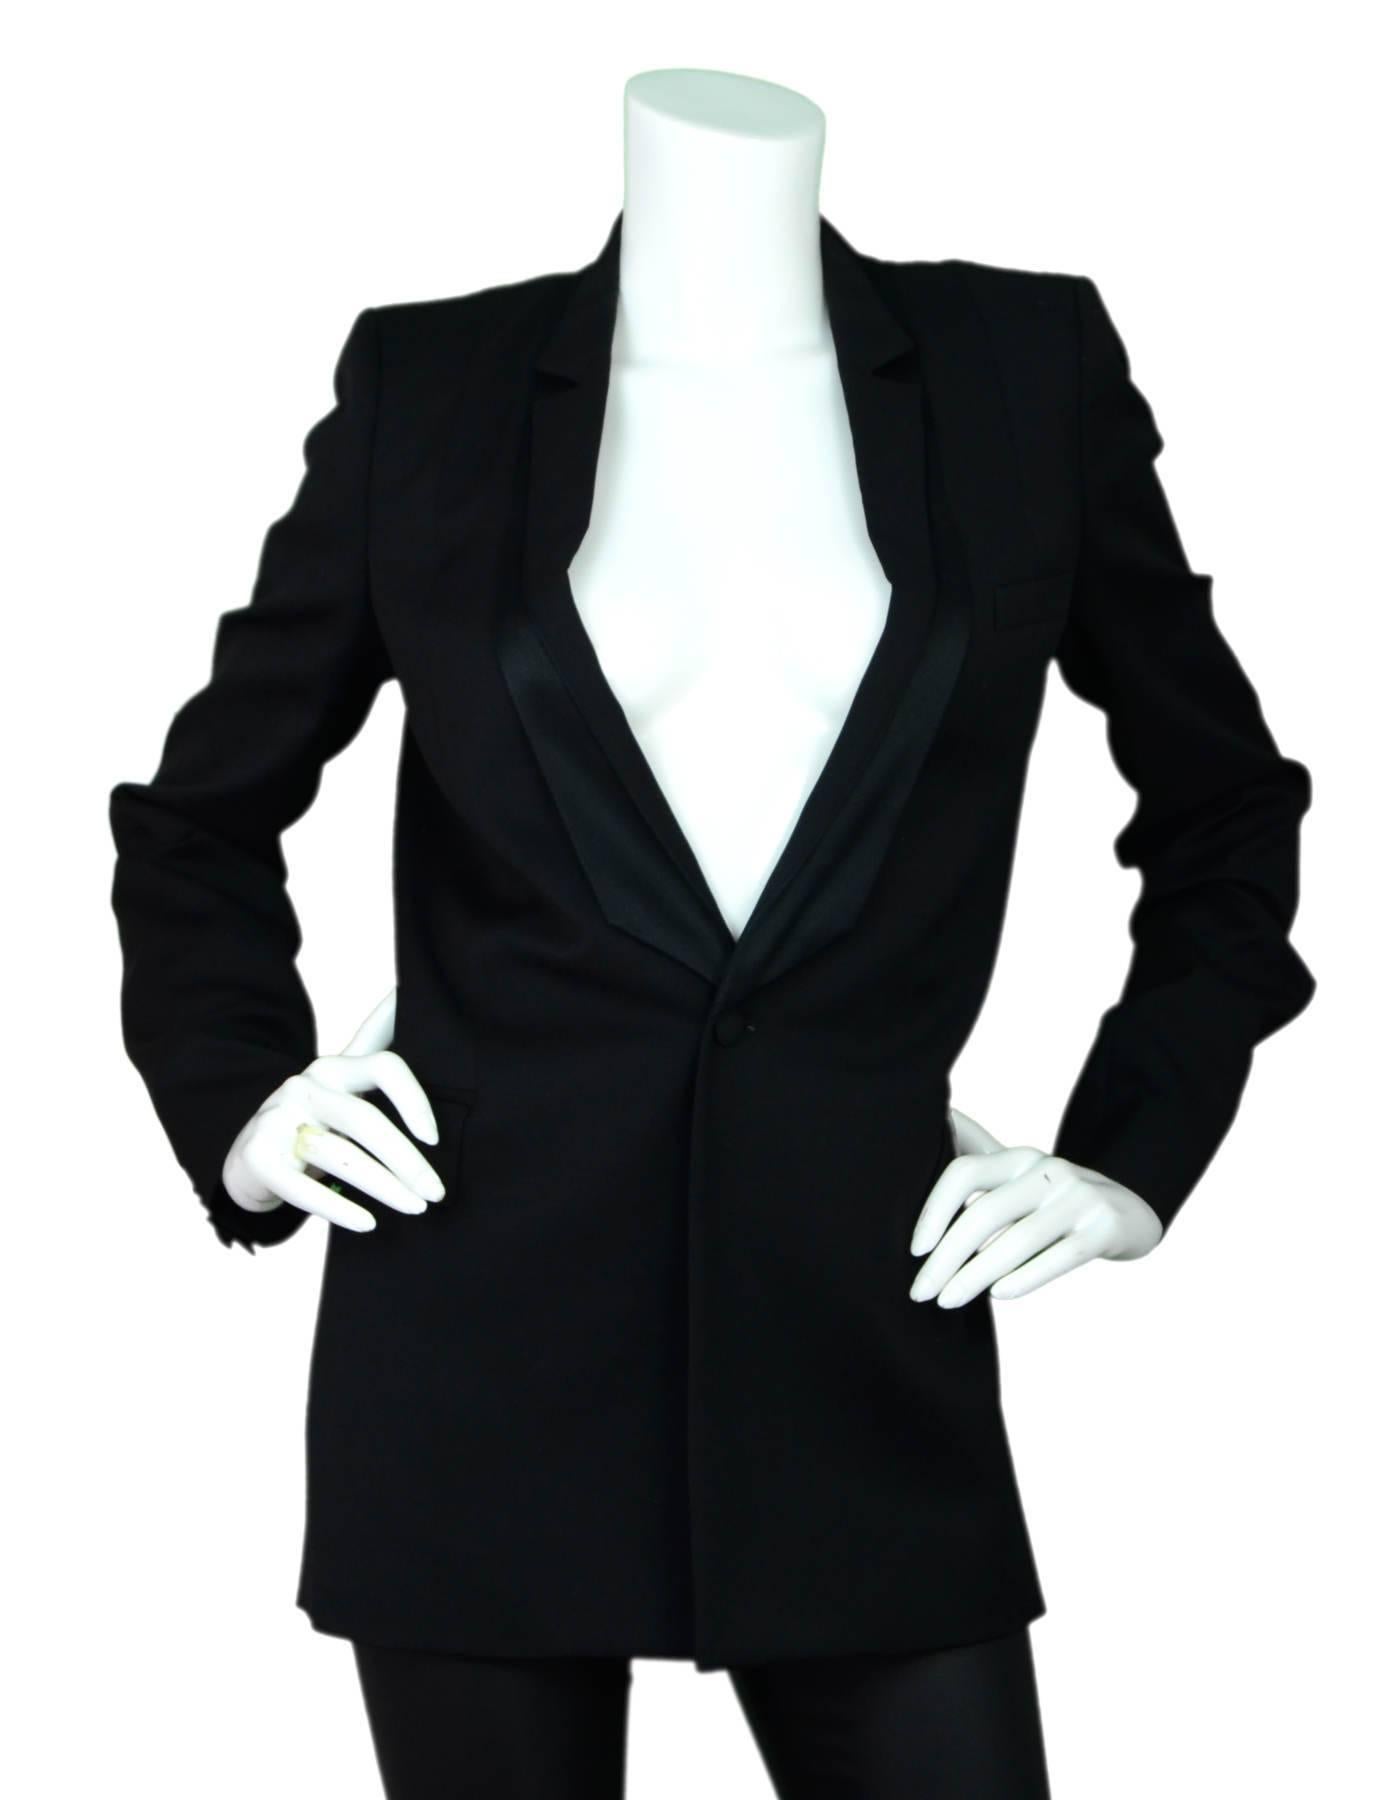 Givenchy Black Wool Blazer Sz FR36

Made In: Italy
Color: Black
Composition: 100% Wool
Lining: Black textile
Closure/Opening: Front single button closure
Overall Condition: Excellent pre-owned condition, some wear and staining at interior